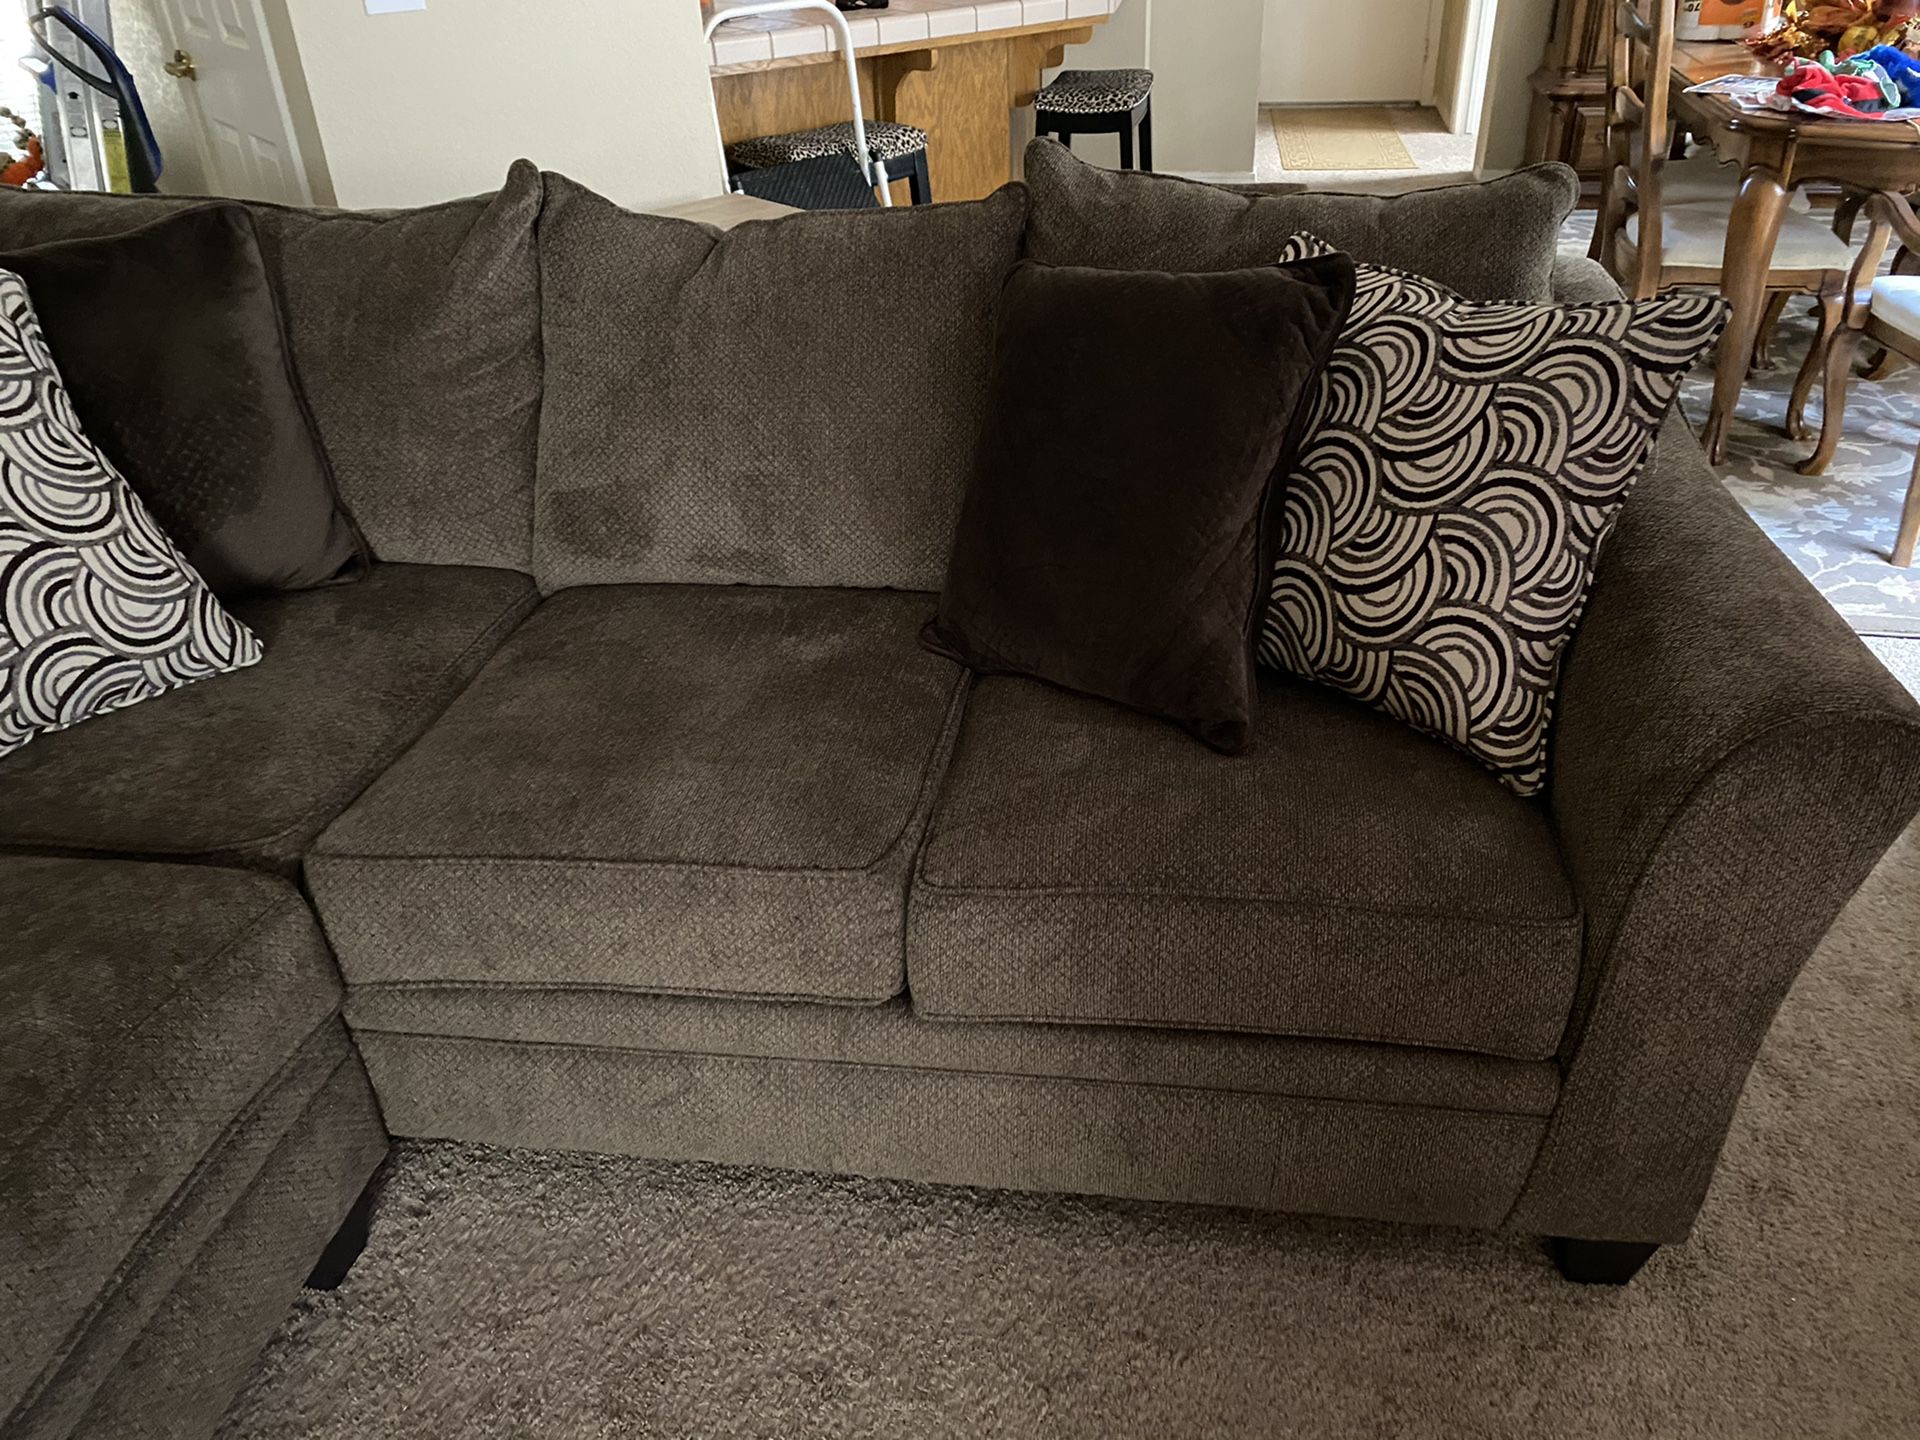 Huge 3 piece sectional new